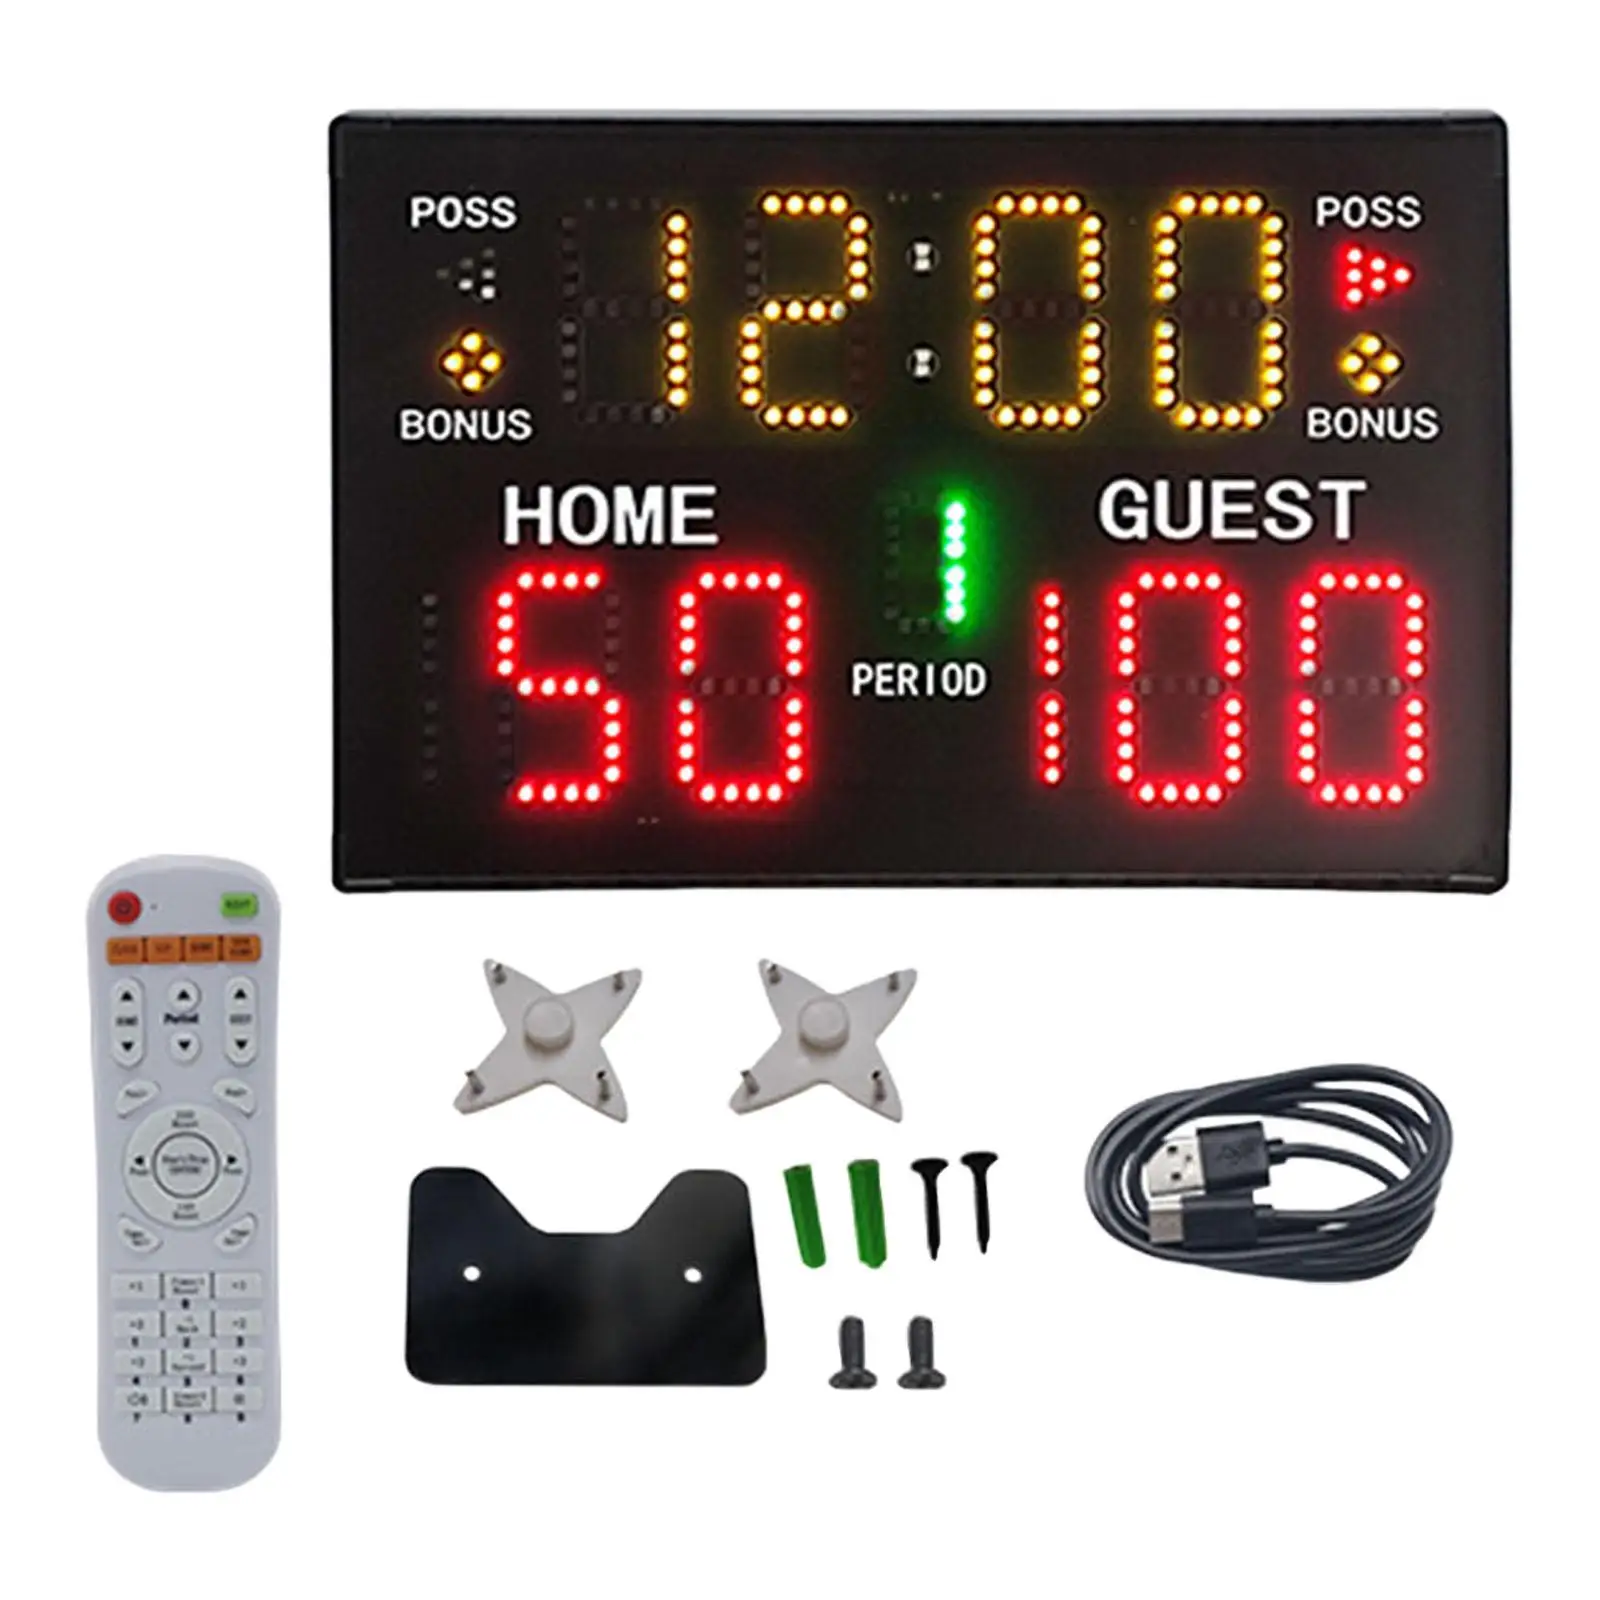 Digital Scoreboard Score Keeper Wall Mounted Battery Operated with Remote Electronic Scoreboard for Tennis Outdoor Boxing